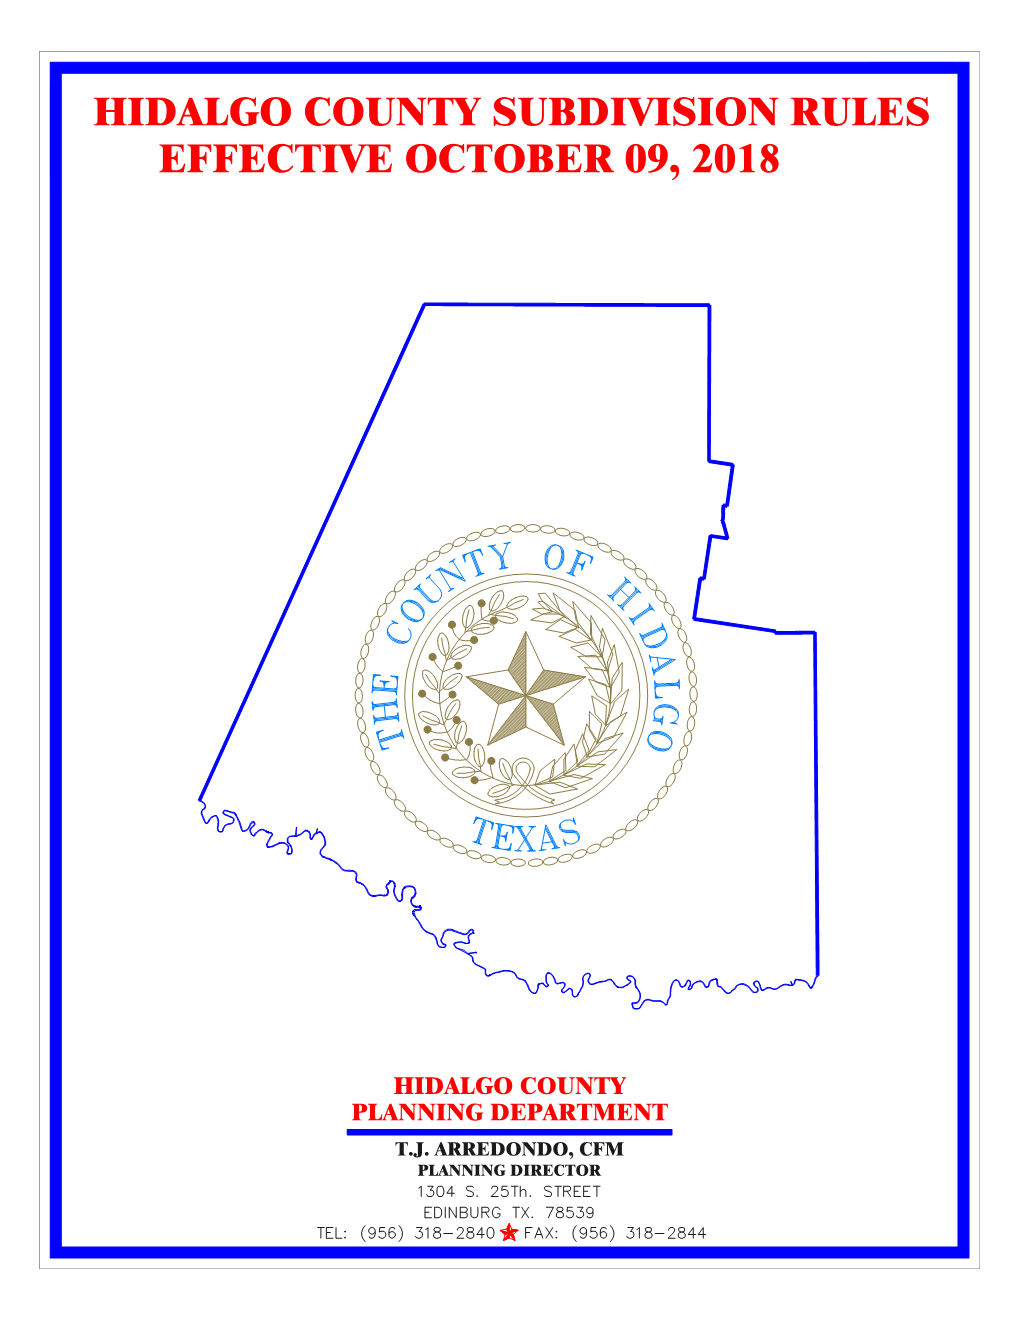 Hidalgo County Subdivision Rules Effective October 09, 2018